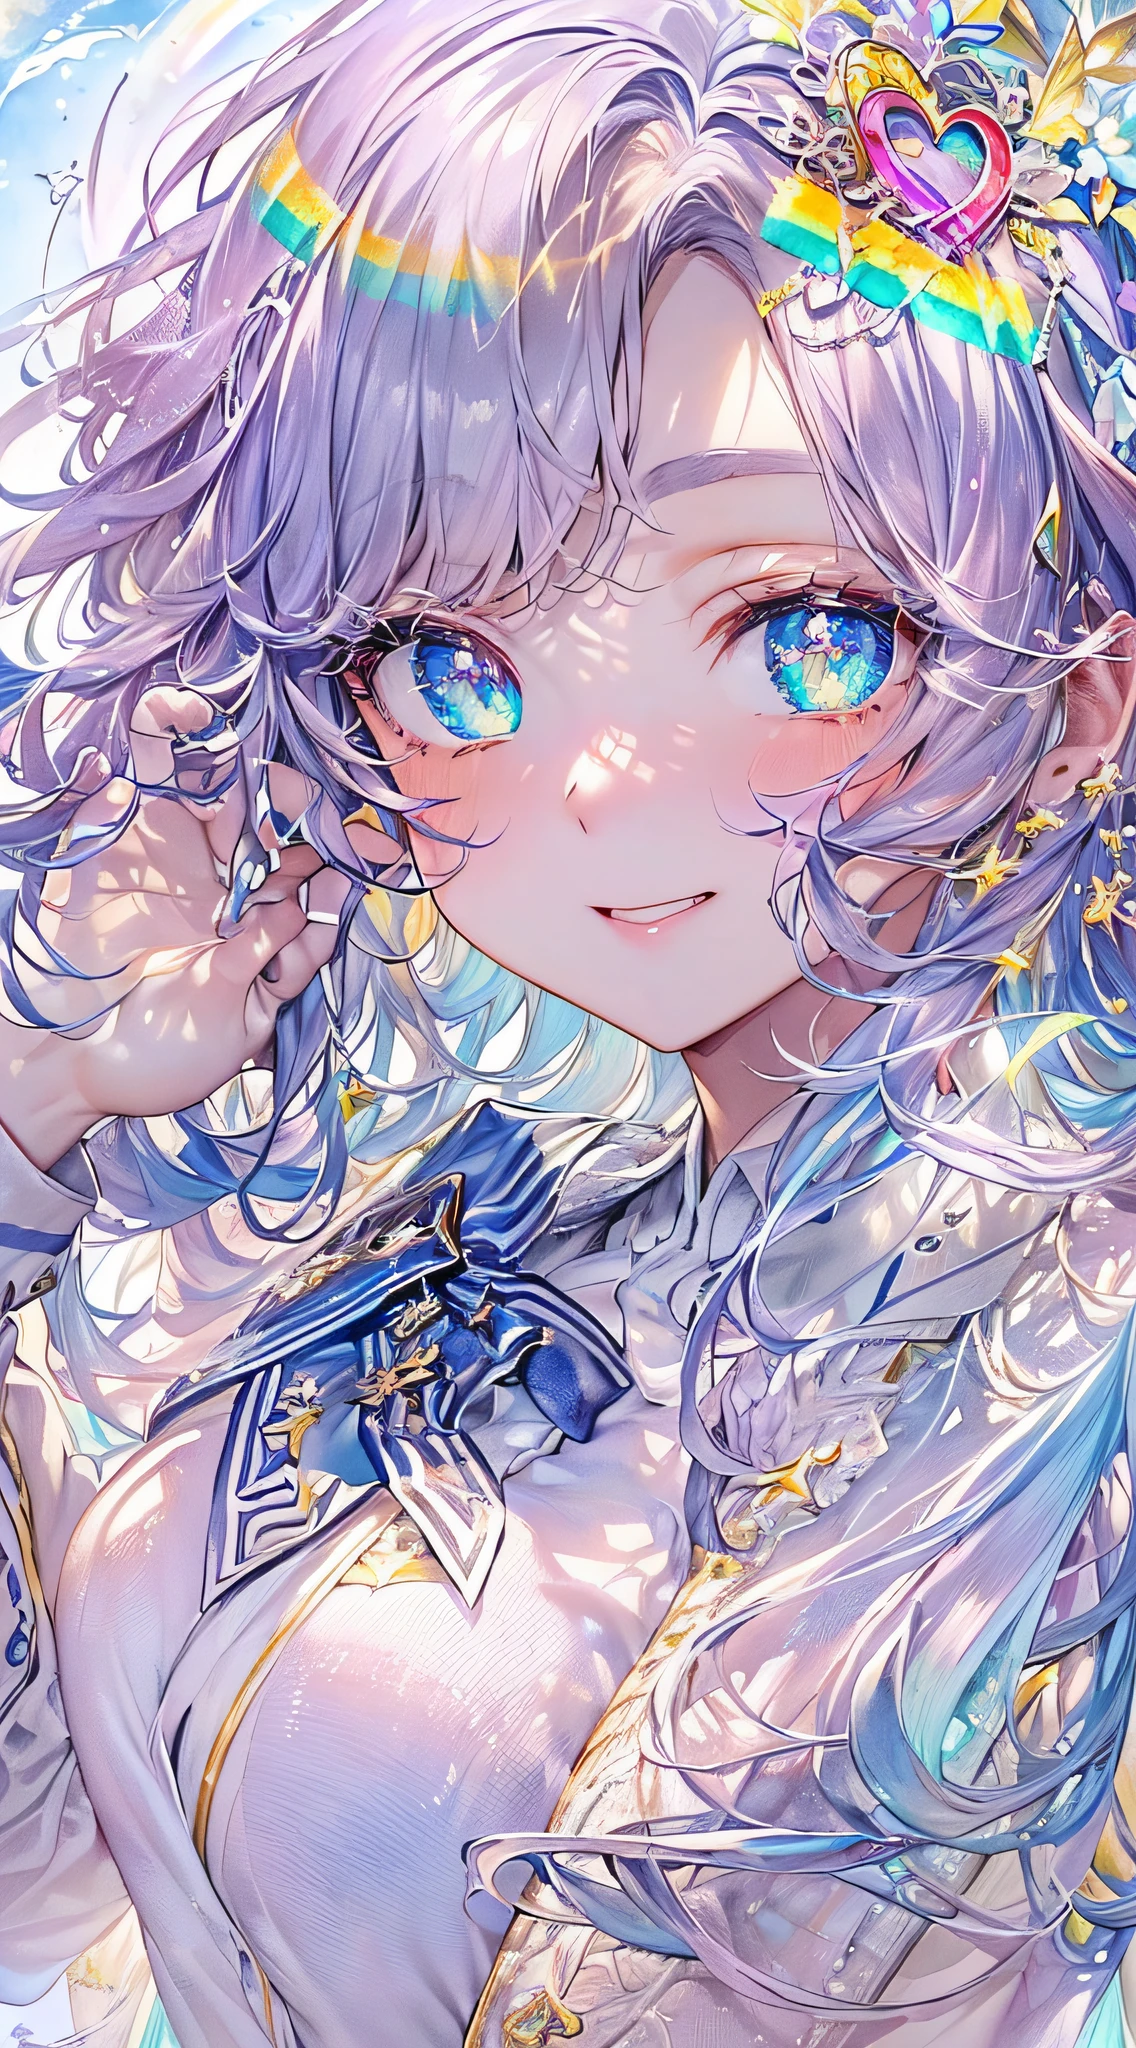 Soft Focus , (Bright gradient watercolor :1.5, Lens Flare:1.5 , Glitter :1.5), Glow , Dreamy , White background、Grid illusion, Colorful, girl、((extremely detailed eye:1.5)),((Face Zoom:1.5)),((Face Focus:1.5)),(((​masterpiece、top-quality、top-quality、watercolor paiting)))(Curly)、Official art、Beautifully Aesthetic:1.2)、eye glass、(Hand and hand heart shape:1.5),(4girl:1.5)、(Fractal Art:1.3)、The upper part of the body、colourfull、((Ultra-detailed retina:1.5))、embarrassed from、(Midriff)、((Super Detail Eyes:1.5))、(rainbow-colored hair、colourful hair、Half blue and half light blue hair:1.5)、((the Extremely Detailed CG Unity 8K Wallpapers、​masterpiece、top-quality))、((ultra-detailliert:1.2))、(The best lighting、Best Shadows、extremely delicate and beautiful)、(the Extremely Detailed CG Unity 8K Wallpapers、​masterpiece、best qualtiy、ultra-detailliert)、(The best lighting、Best Shadows、extremely delicate and beautiful)、(the perfect body:1.5)、((High School Uniforms:1.5)),{{{{Dazzling brilliance}}}}、Rainbow Bridge、(masutepiece:1.2), Best Quality, (Illustration:1.2), (Ultra-detailed), hyperdetails, (delicate detailed), (Intricate details), (Cinematic Light, best quality backlight), solo women, Perfect body, (4girl), (Best Illumination, extremely delicate and beautiful), Cinematic Light、【emblem:Irridescent color 】、Blue sky with white angel wings proportional to body、Sunnyday